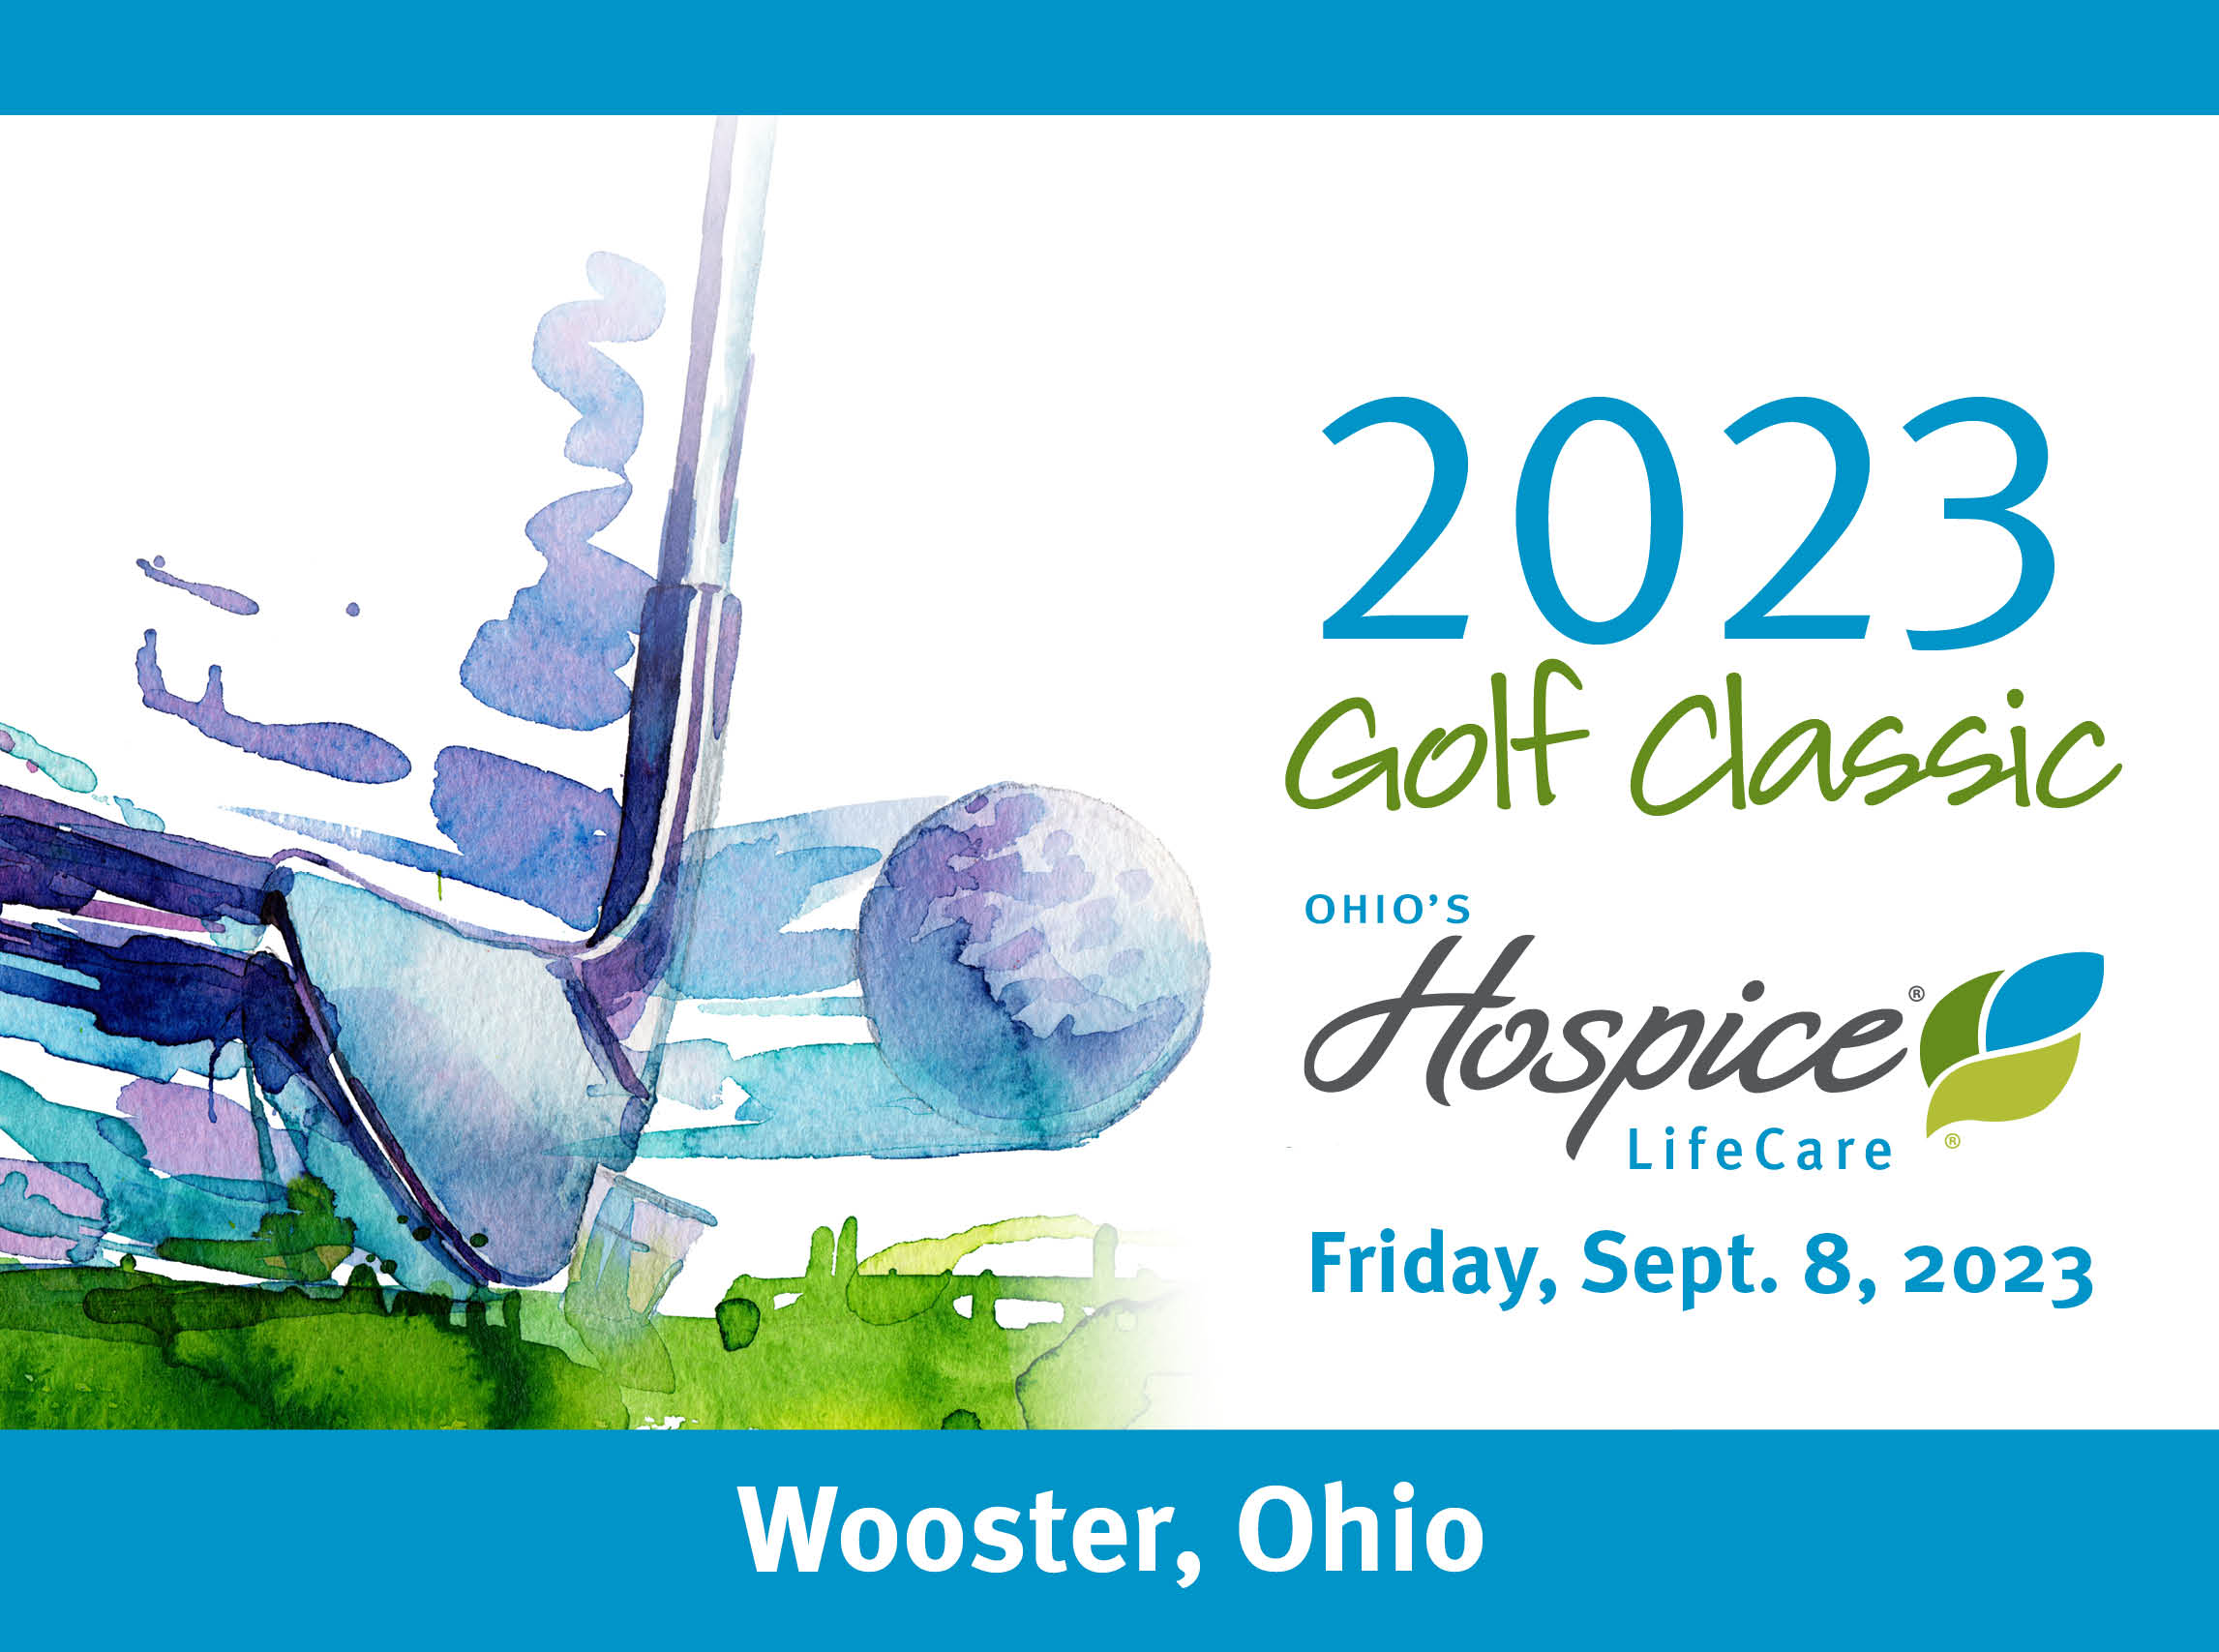 2023 Golf Classic Ohio's Hospice LifeCare Friday, September 8, 2023. Wooster, Ohio